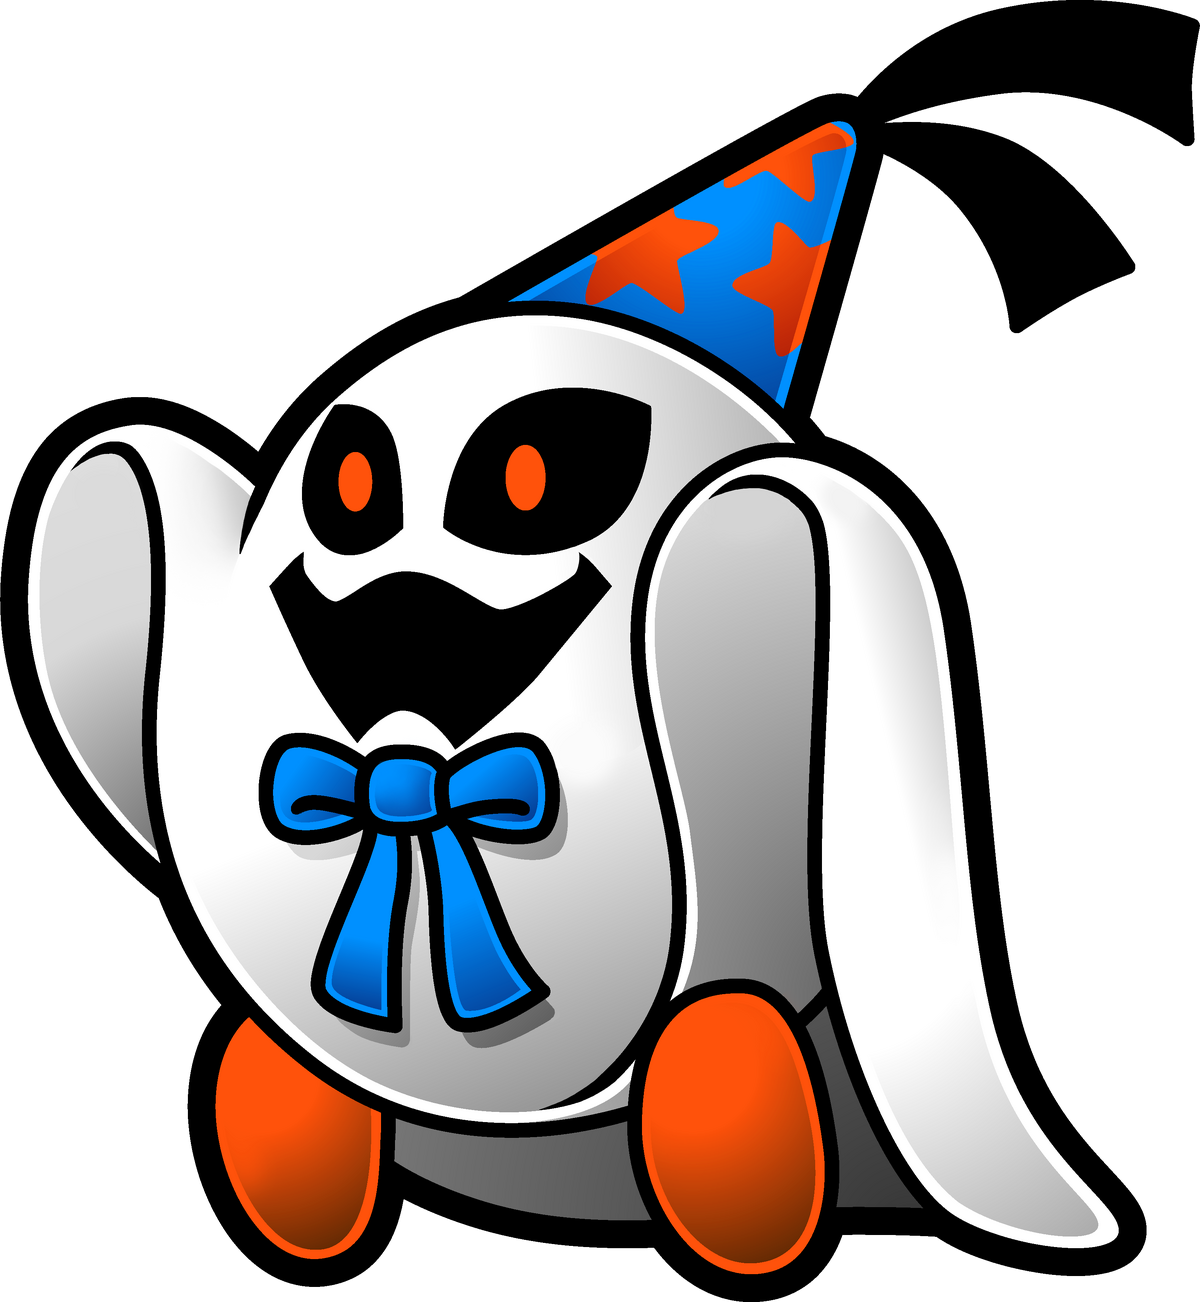 paper mario the thousand year door coloring pages